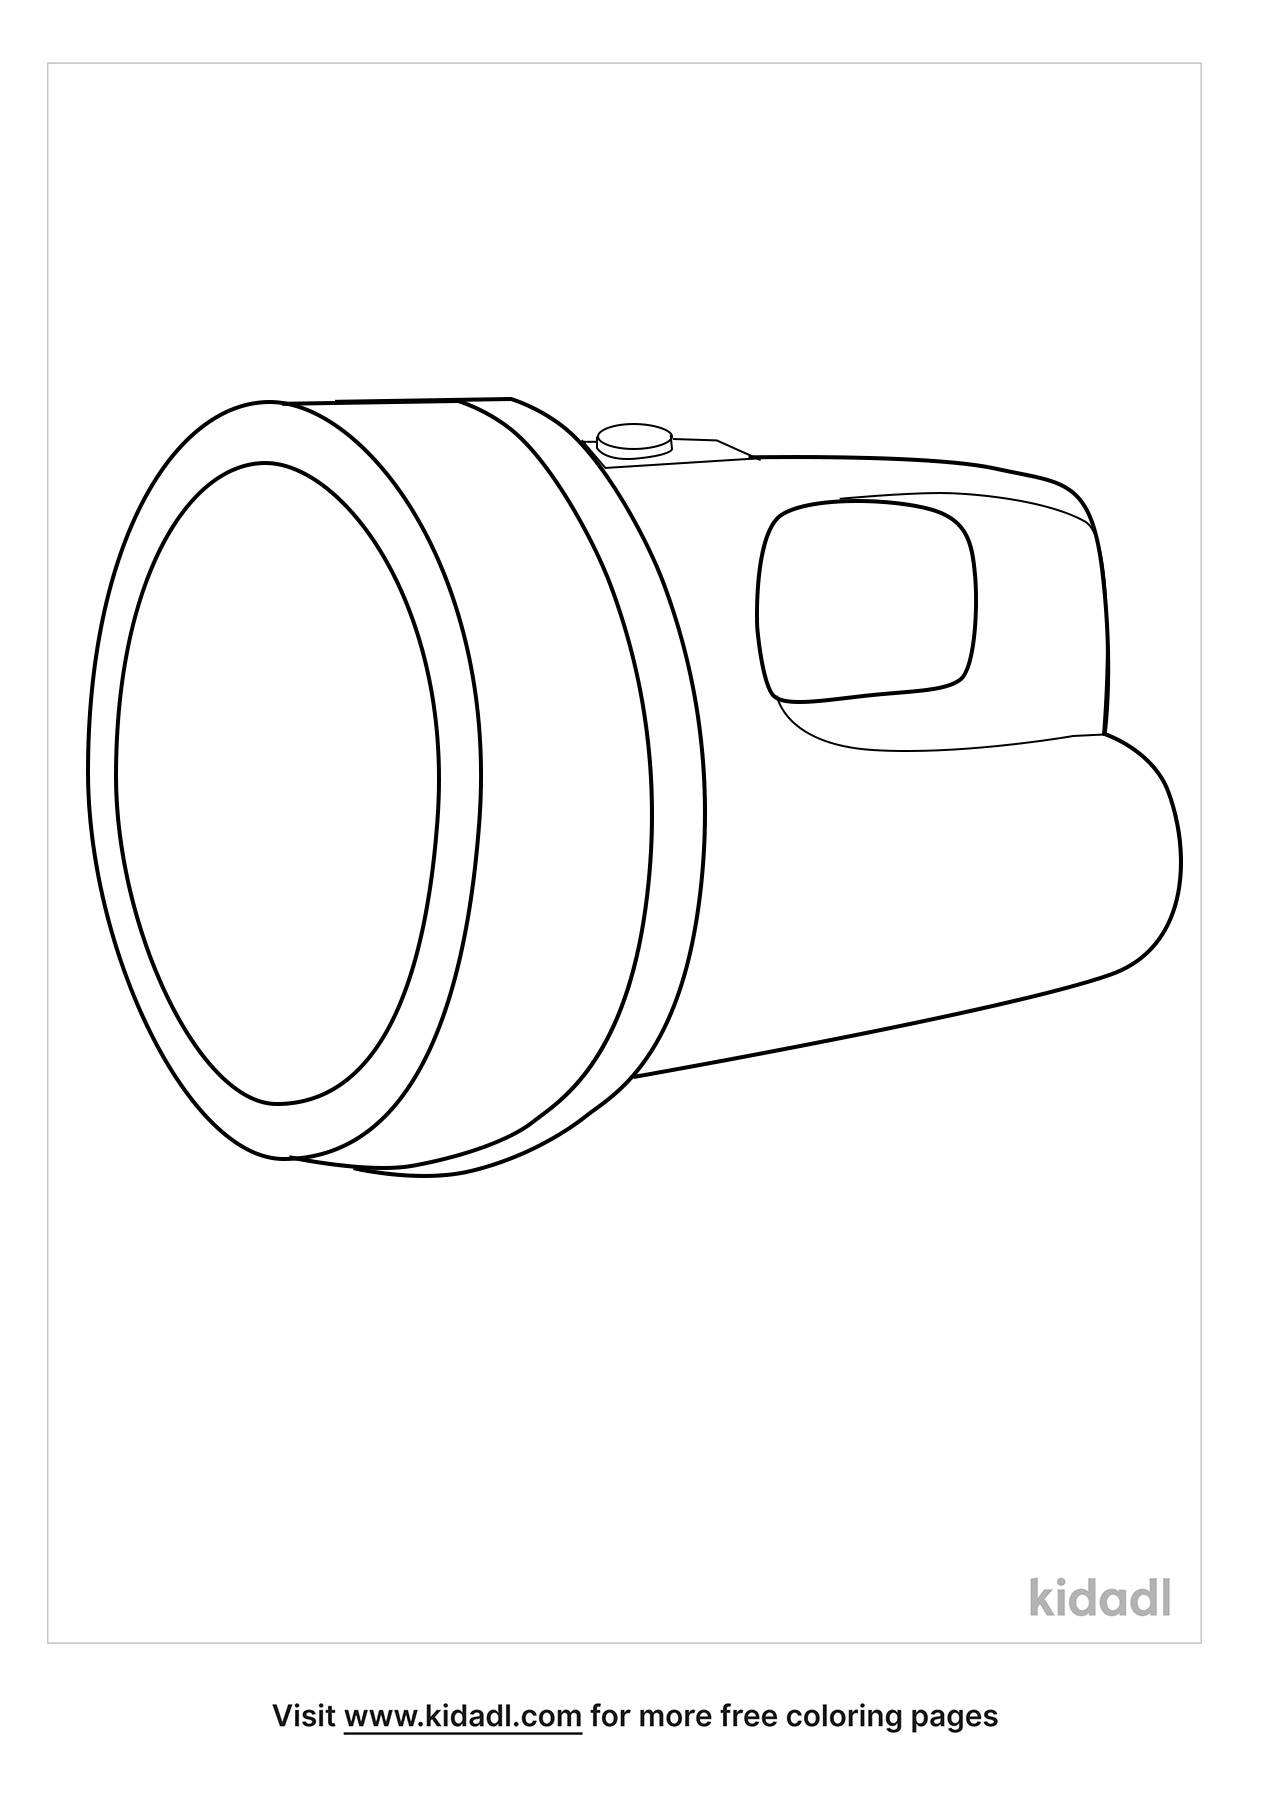 Flashlight Coloring Pages | Free At-home Coloring Pages | Kidadl